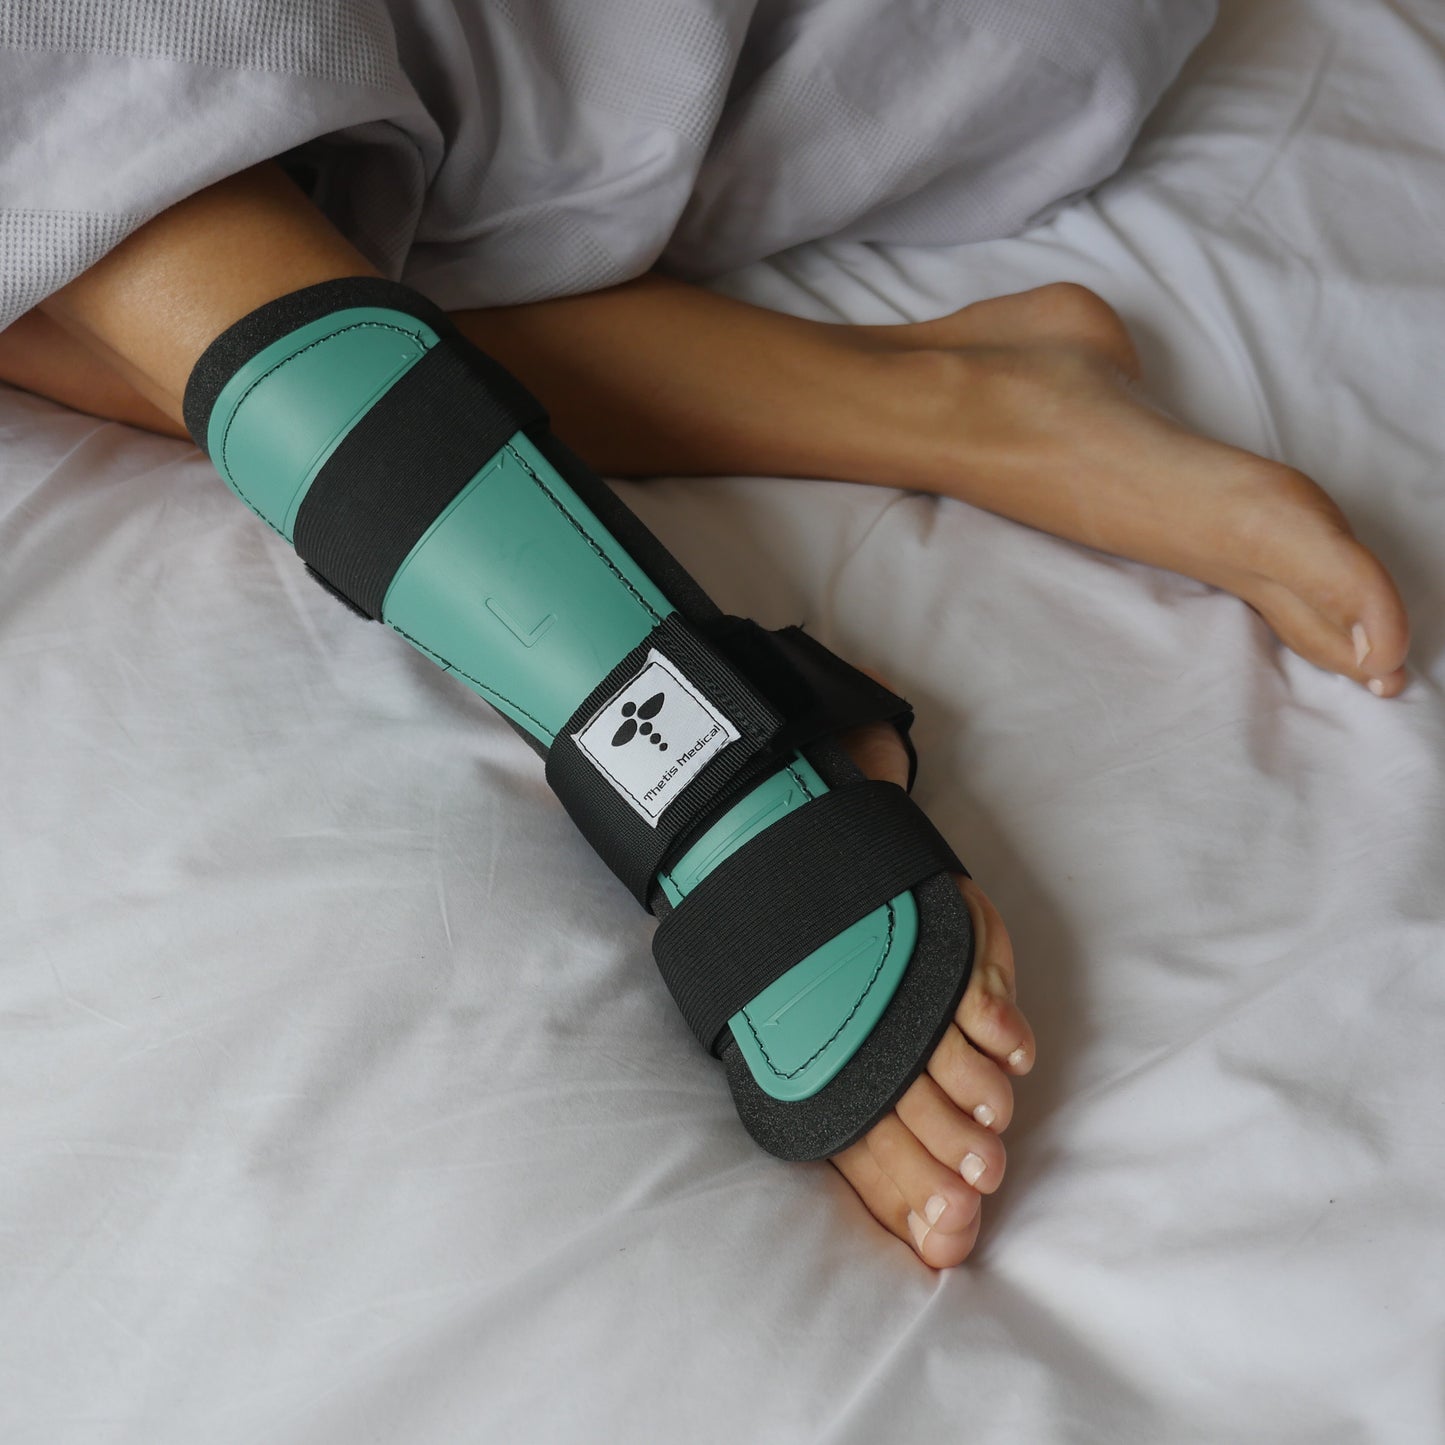 Thetis Medical Achilles Rupture Splint in-use in bed from side